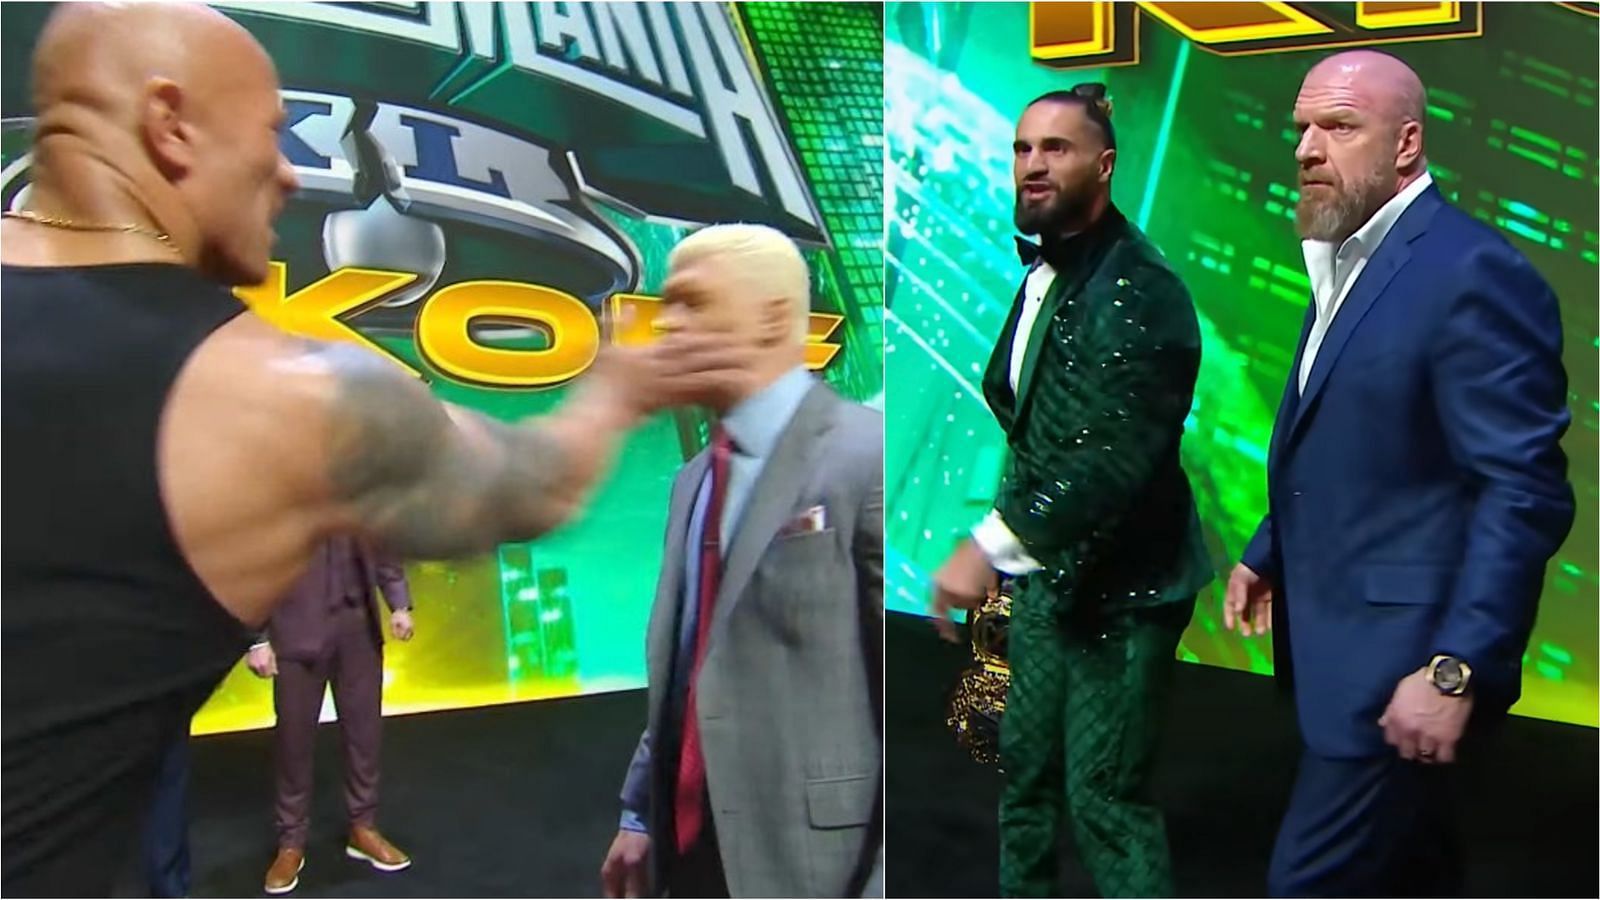 Things got heated between Cody Rhodes and The Rock last night!